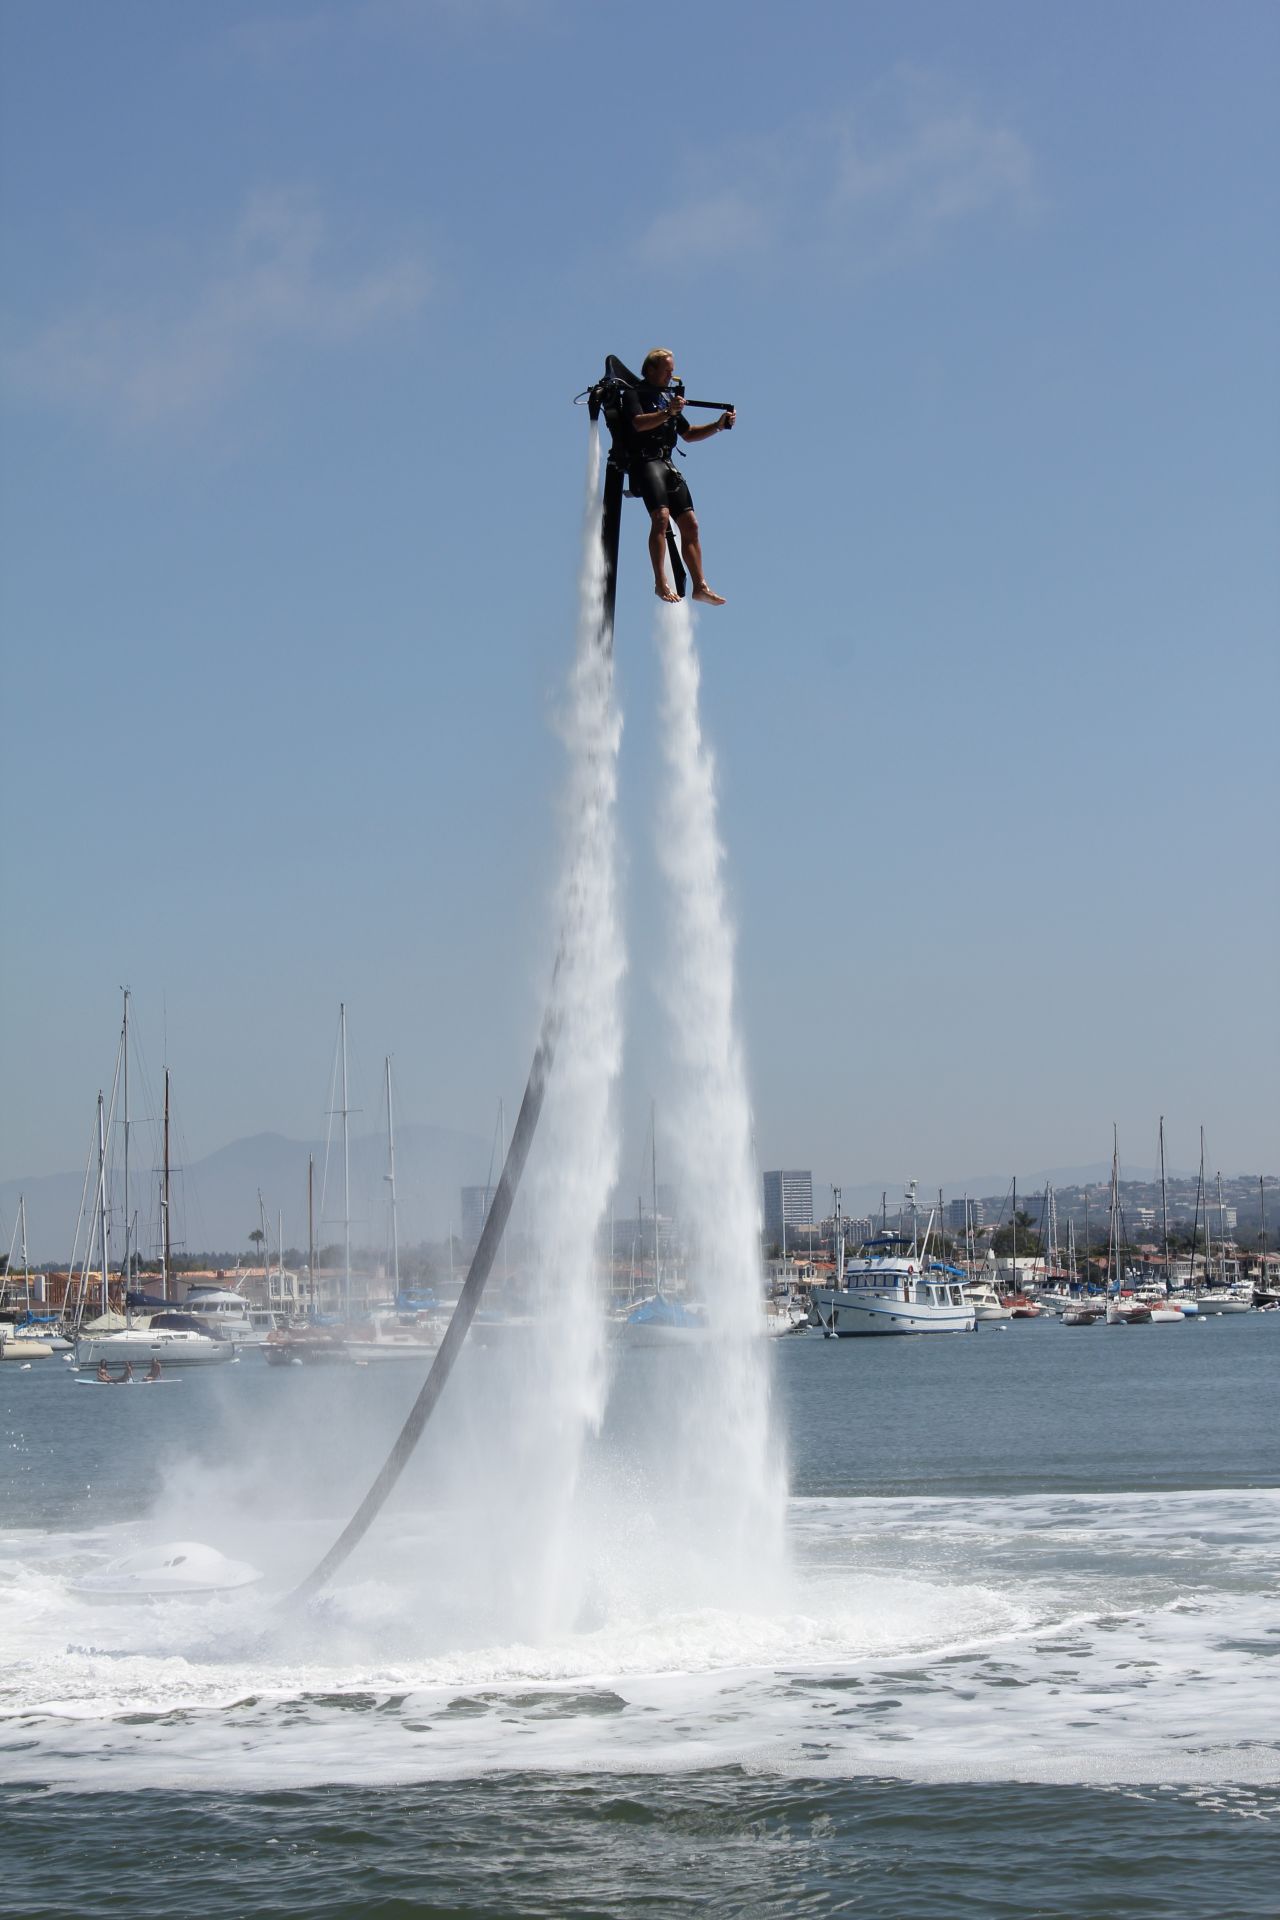 A man tries out the Jetlev water jet pack. First-time "flyers" can reach up to 15 feet; the jet pack can propel flyers a maximum of 30 feet high.